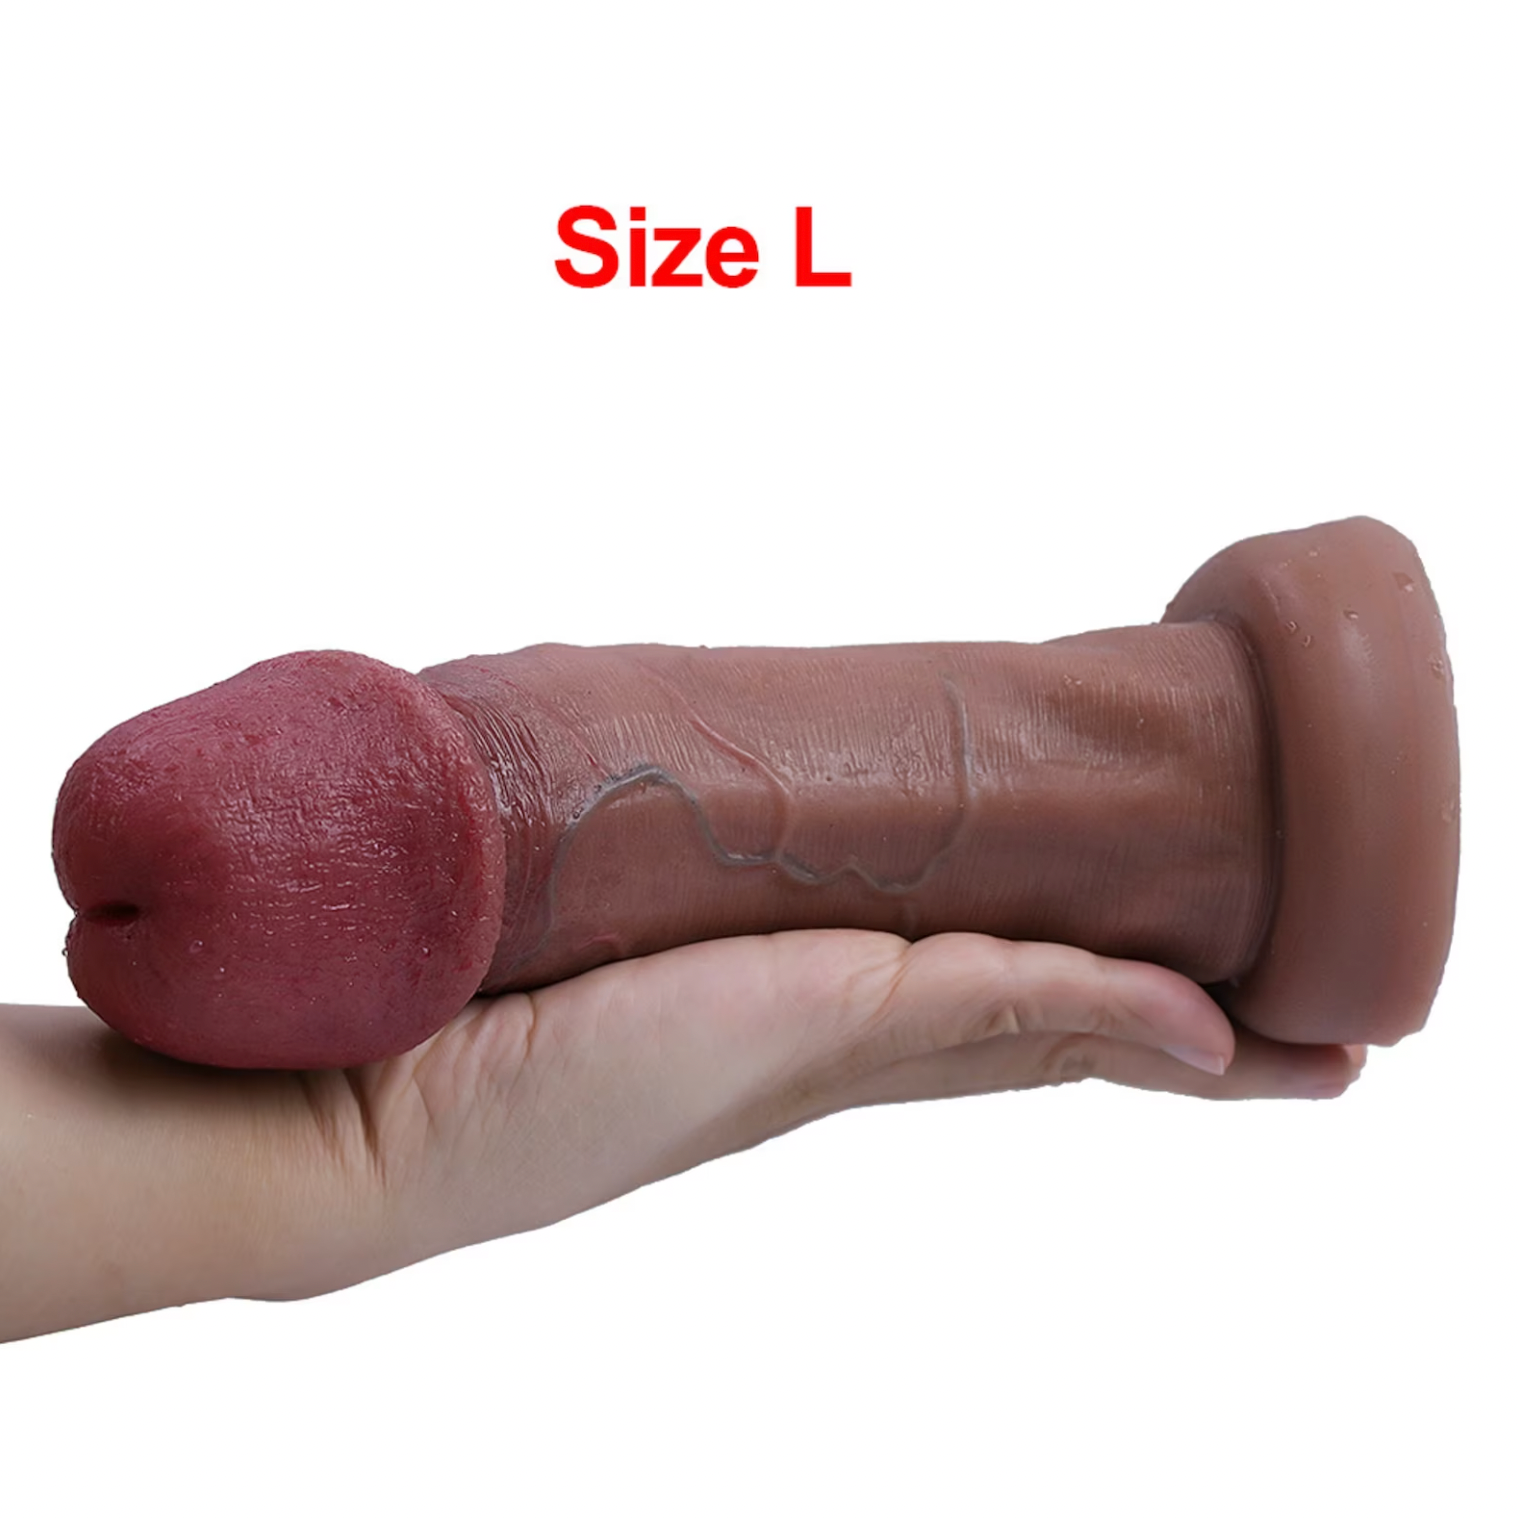 Very realistic dildo with big glans 8.7 inches